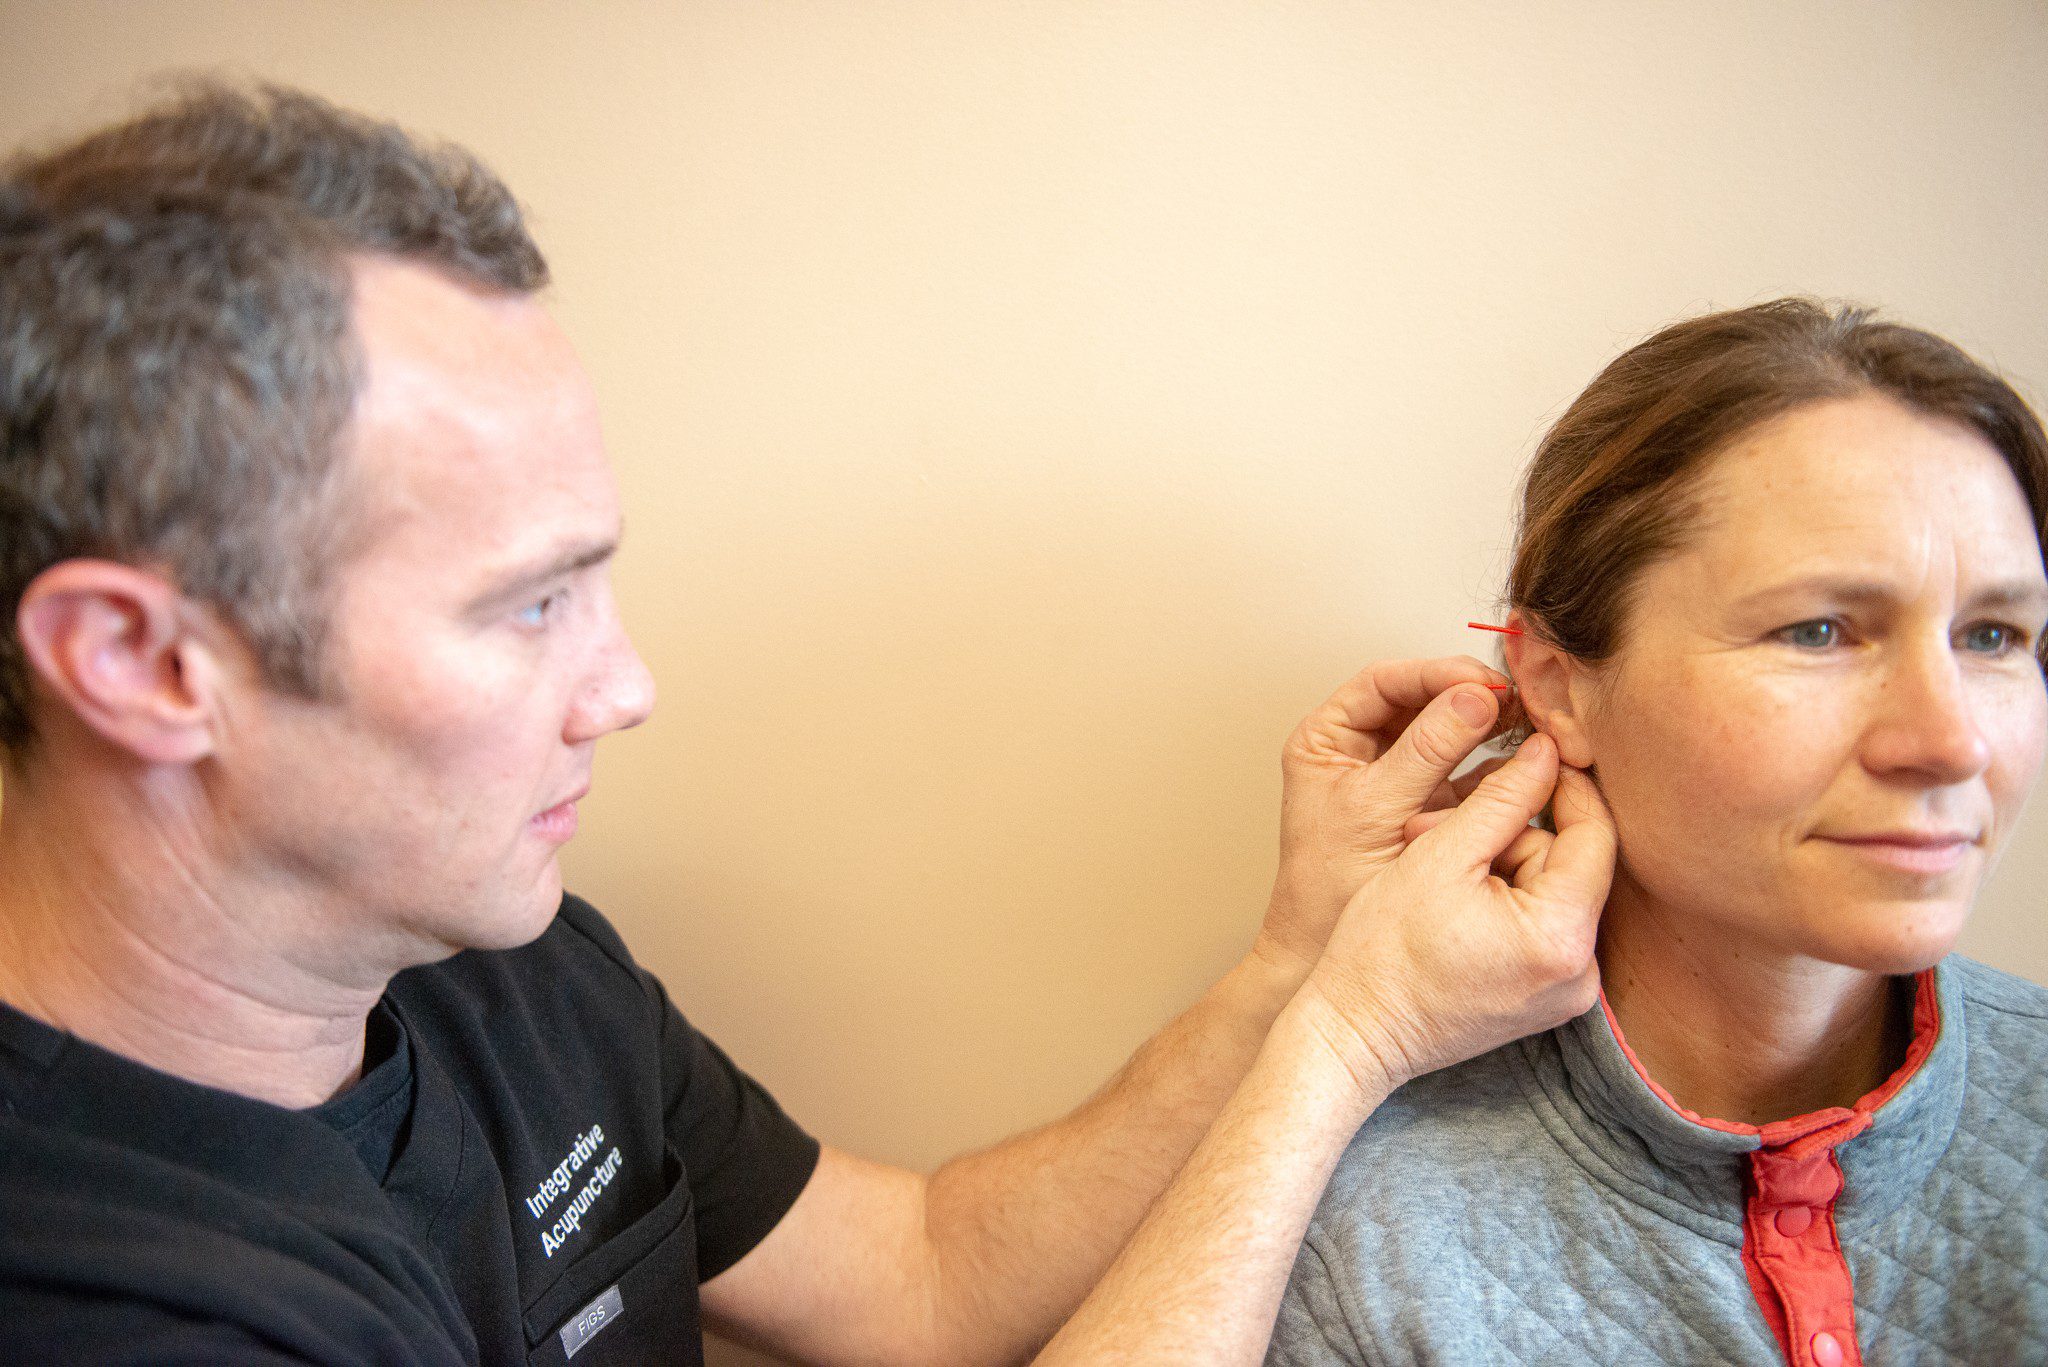 Jonathan placing acupuncture needles in patient's ear.